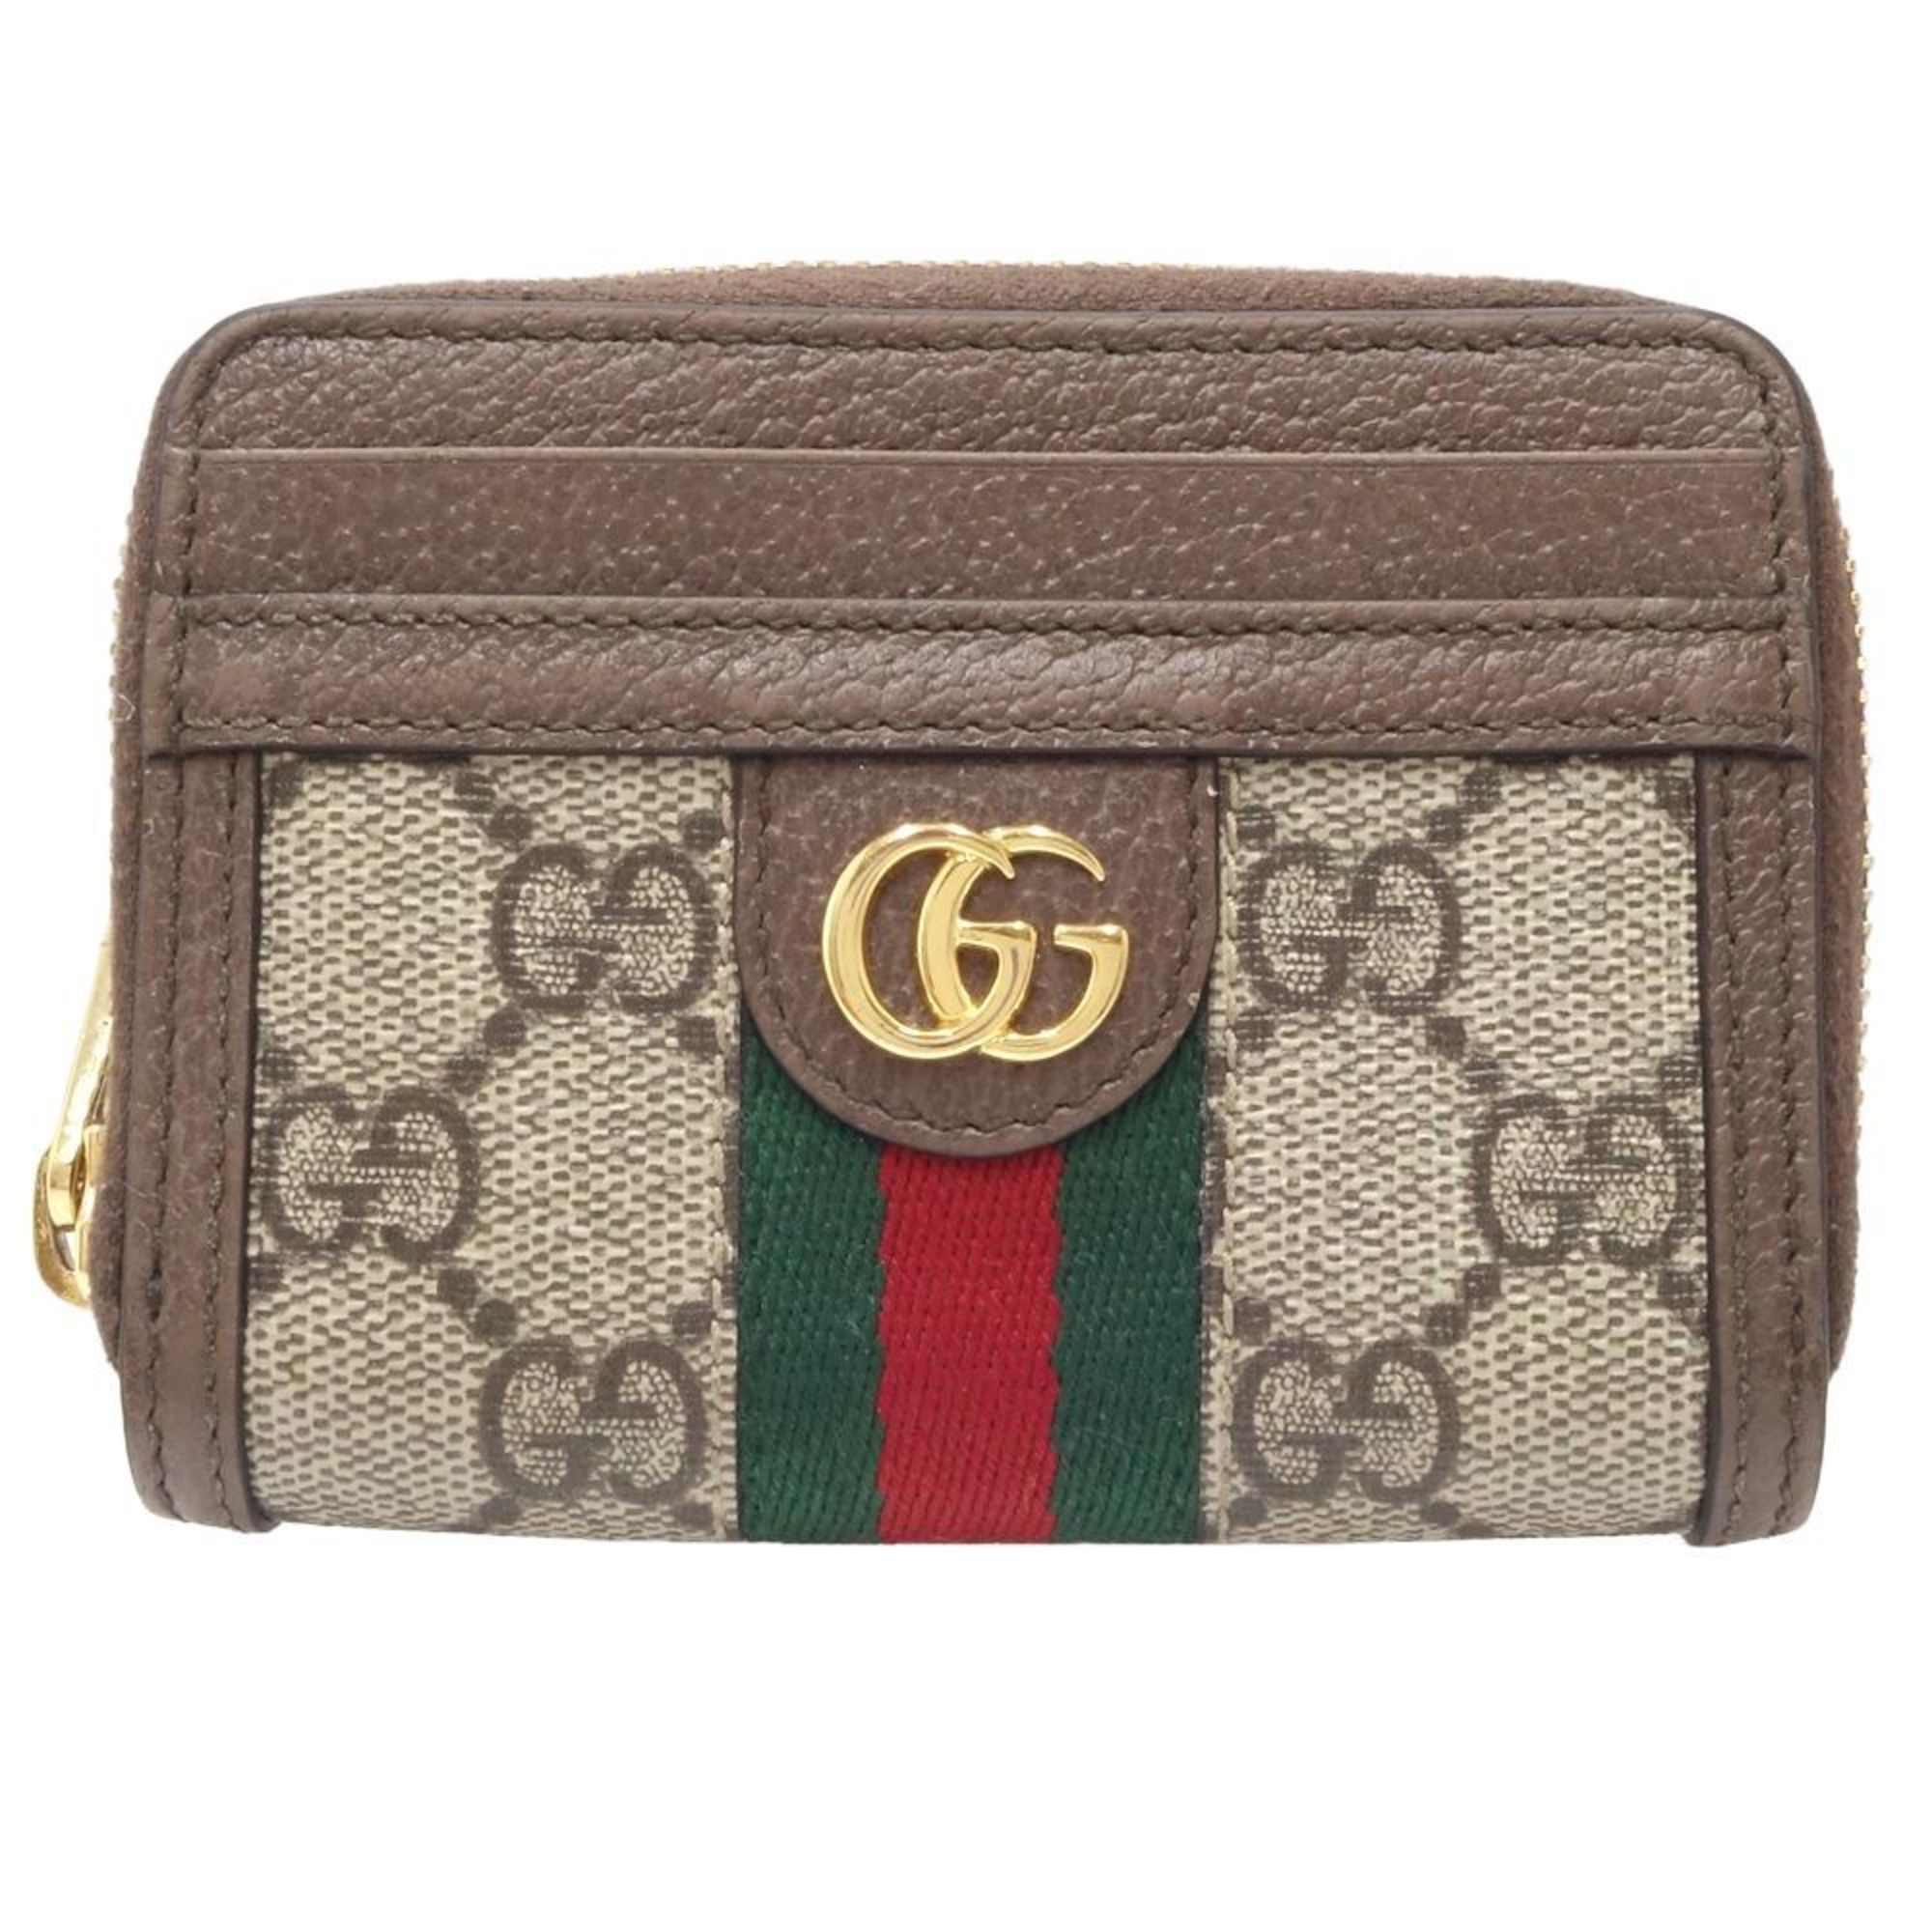 GUCCI Gucci Ophidia GG Supreme Business Card Holder/Card Case Wallet 658552 Canvas Beige Ebony 180299